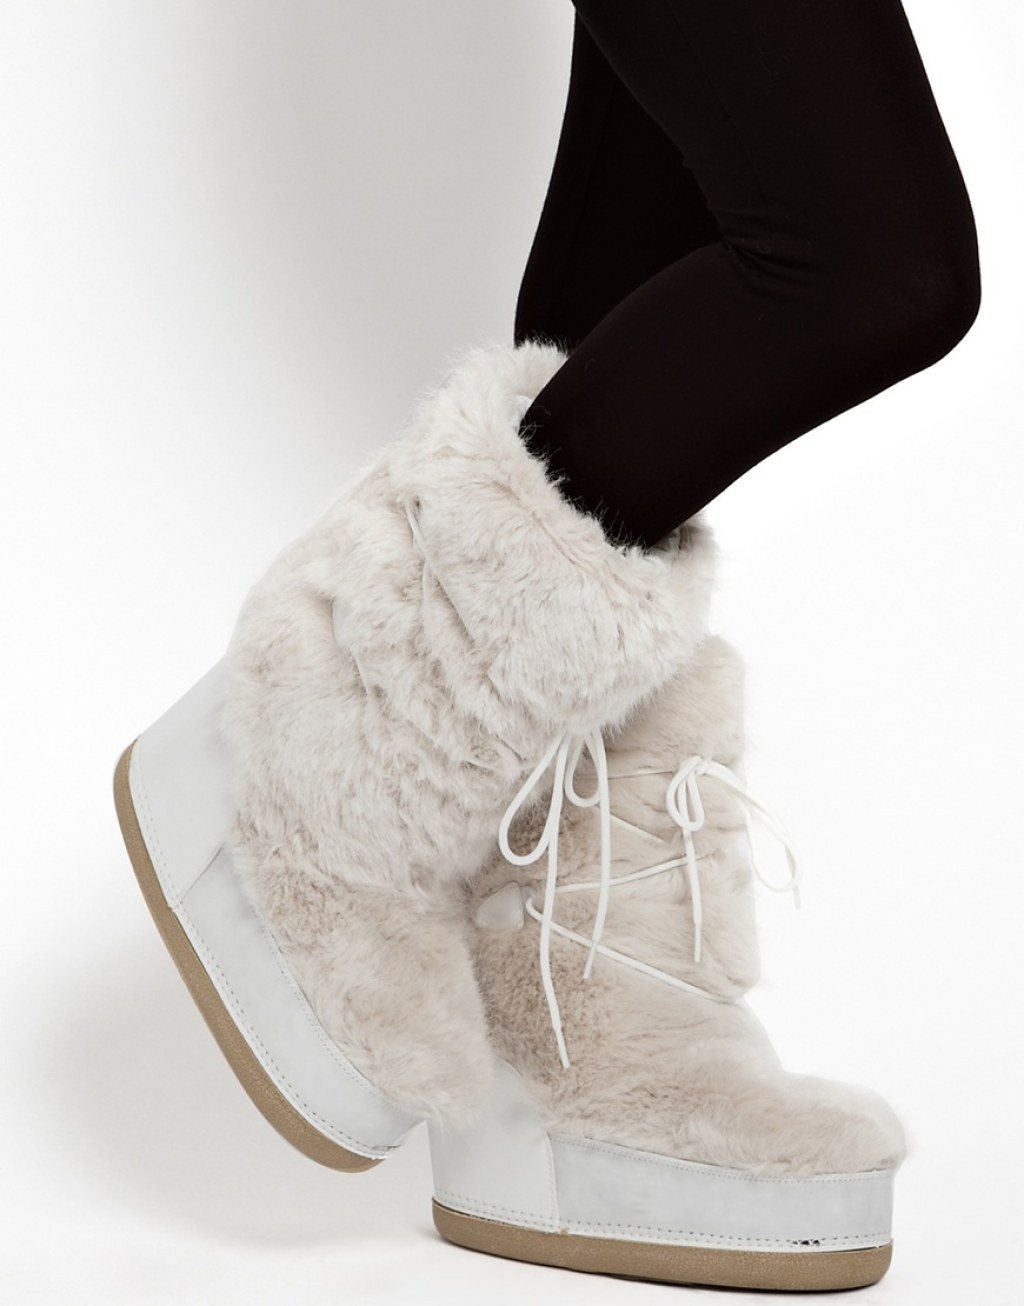 Picture of: ASOS Barts White Faux Fur Snow Boots  Lyst